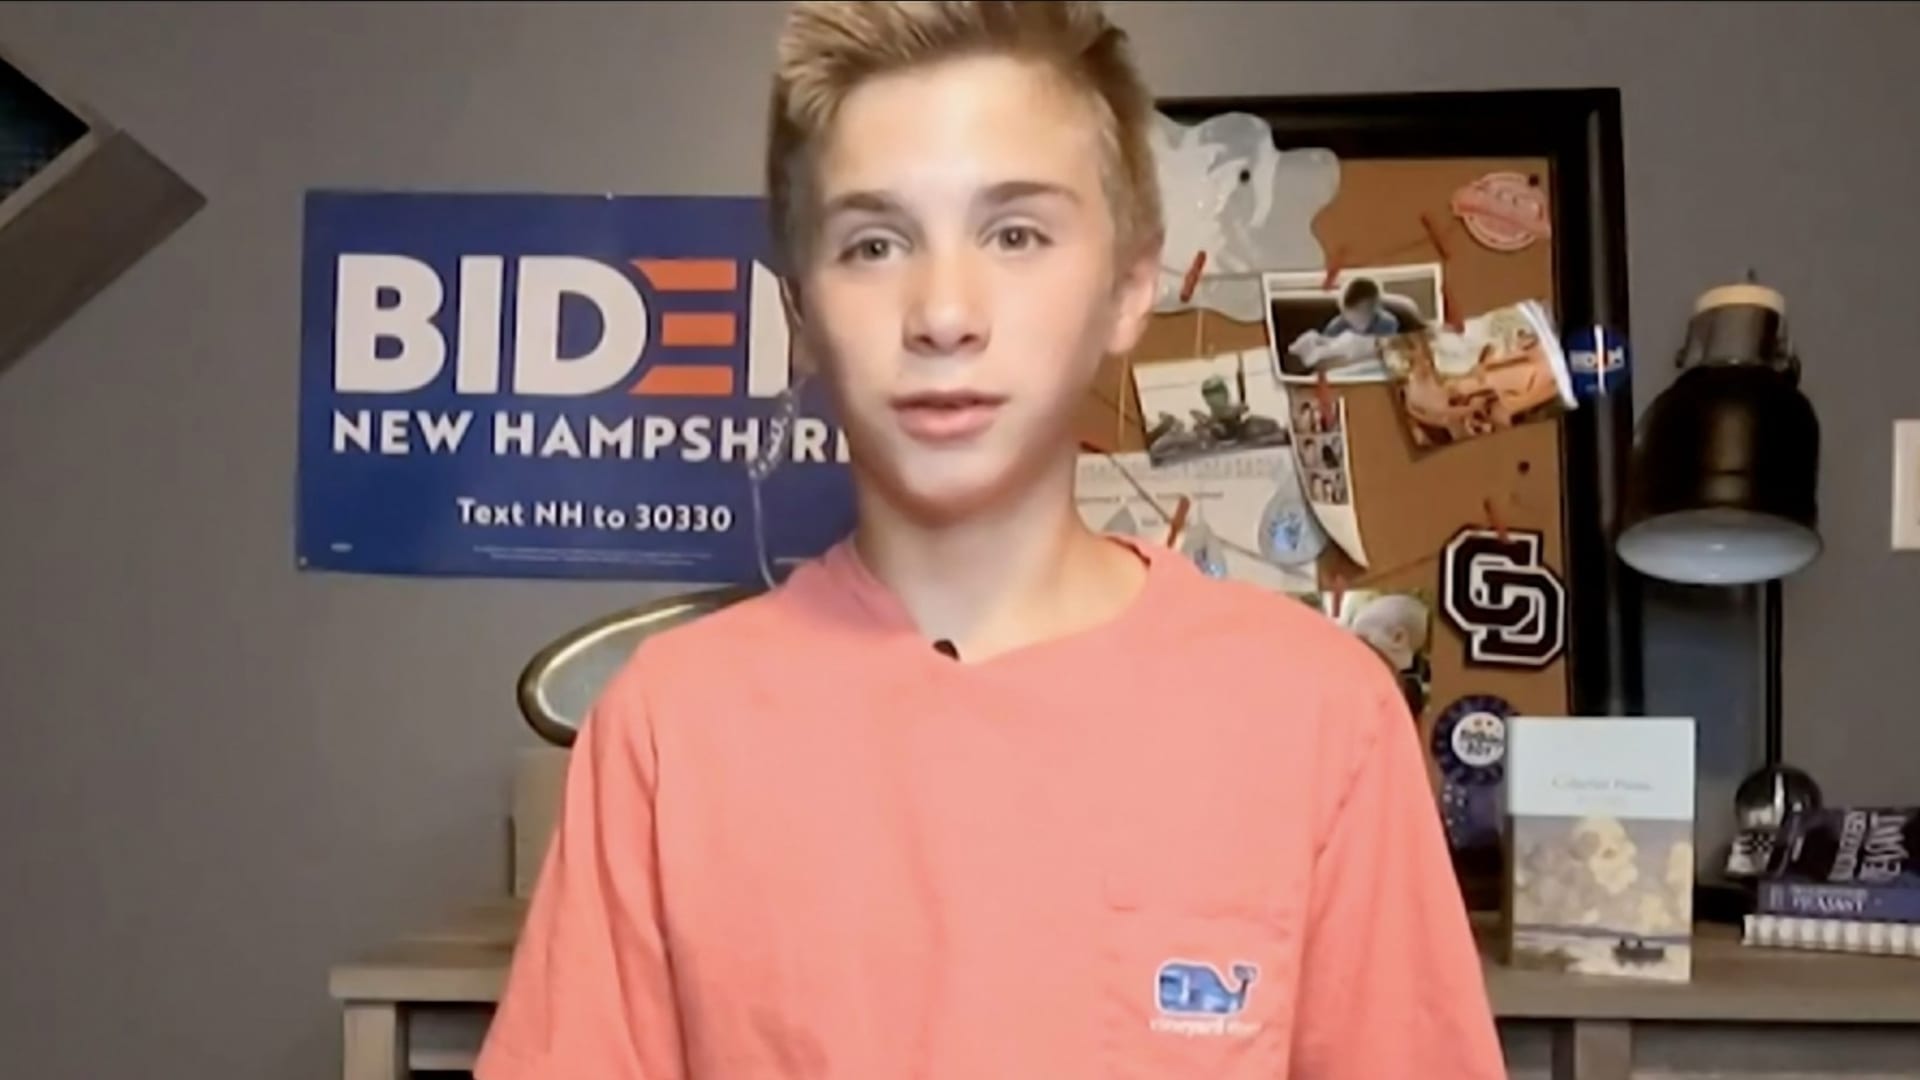 A 13-Year-Old Boy Just Gave a Truly Remarkable Speech. These 3 Things Mattered Most